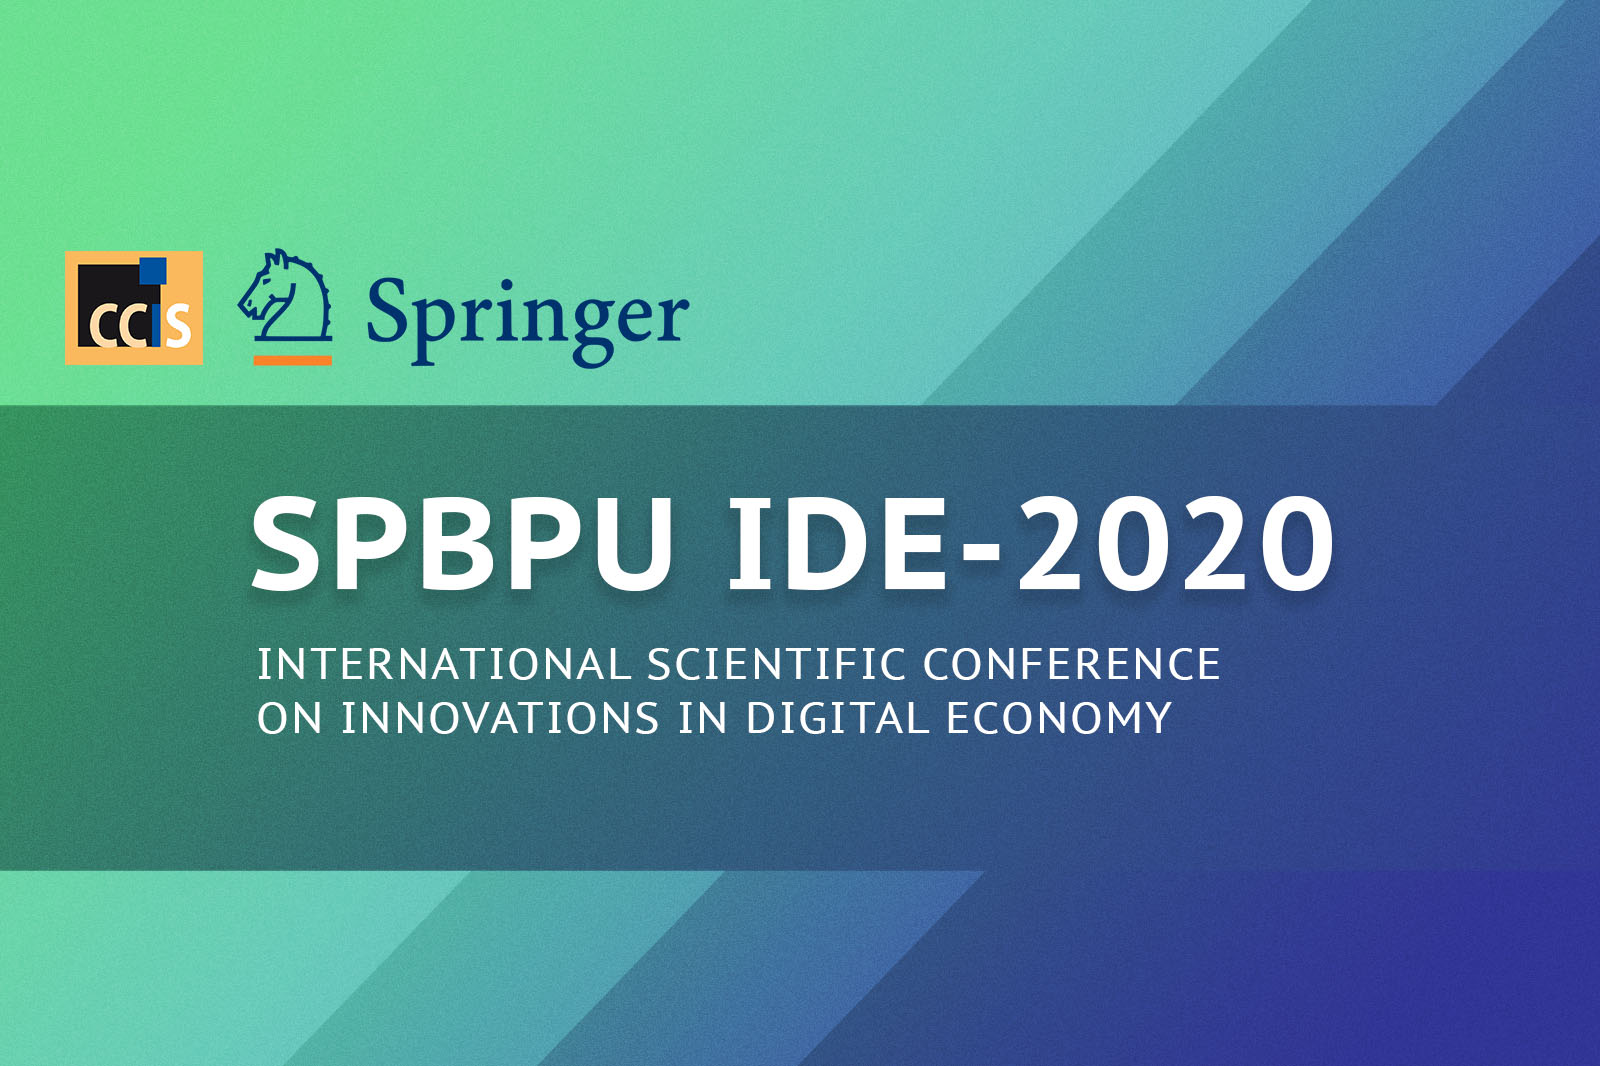 Springers’ CCIS has accepted selected materials from SPbPU IDE 2020 for publishing as a Post-proceedings issue!